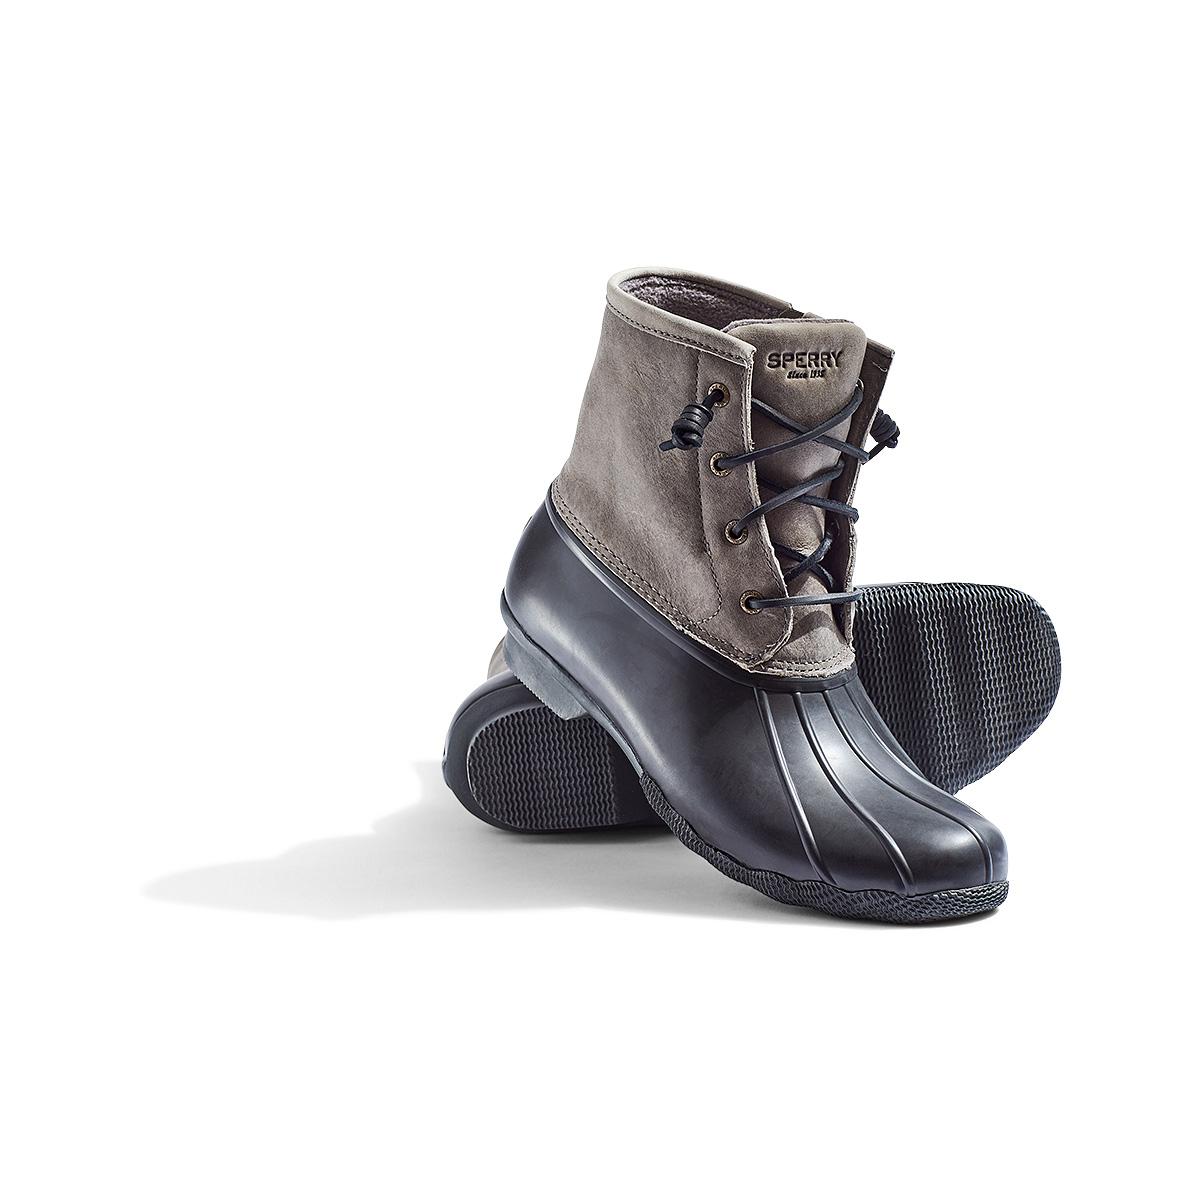 sperry duck boots gray and black